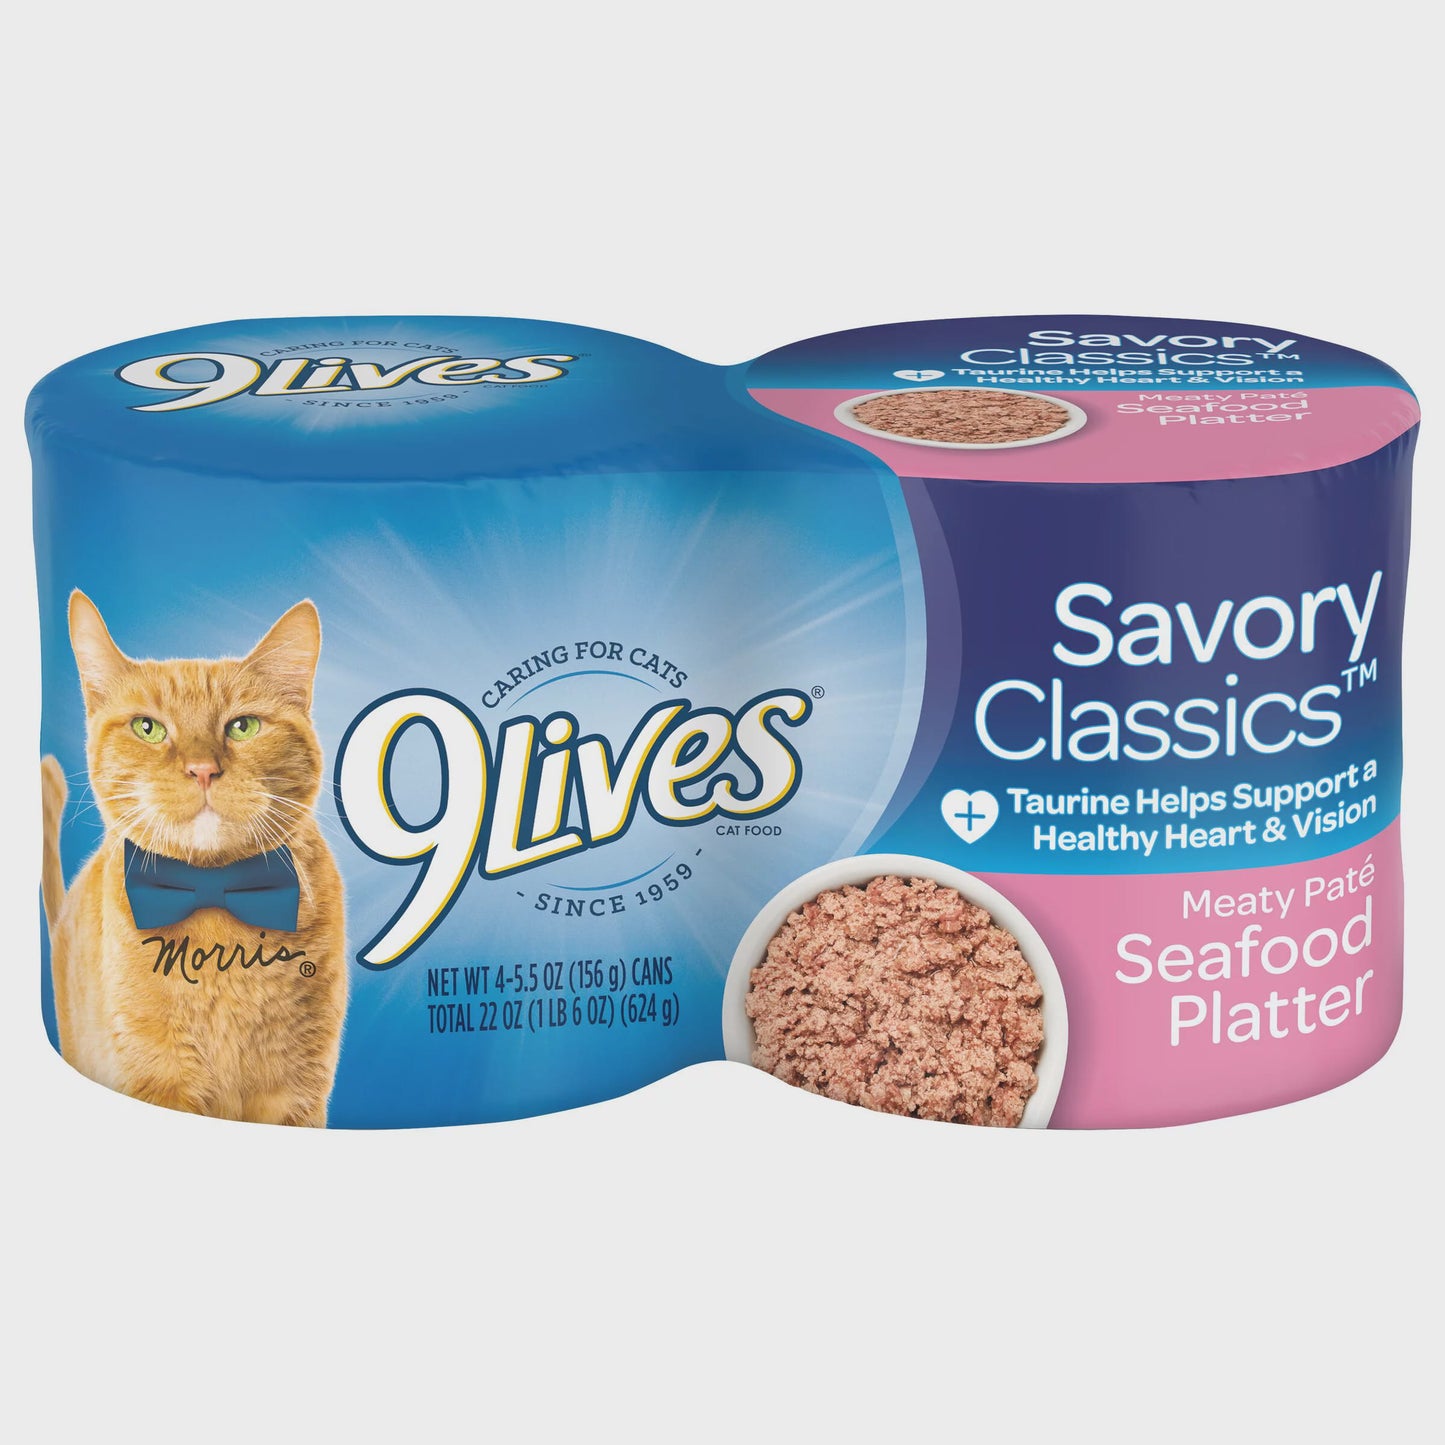 9Lives Meaty Paté Seafood Platter Wet Cat Food, 22-Ounce, Pack of 4